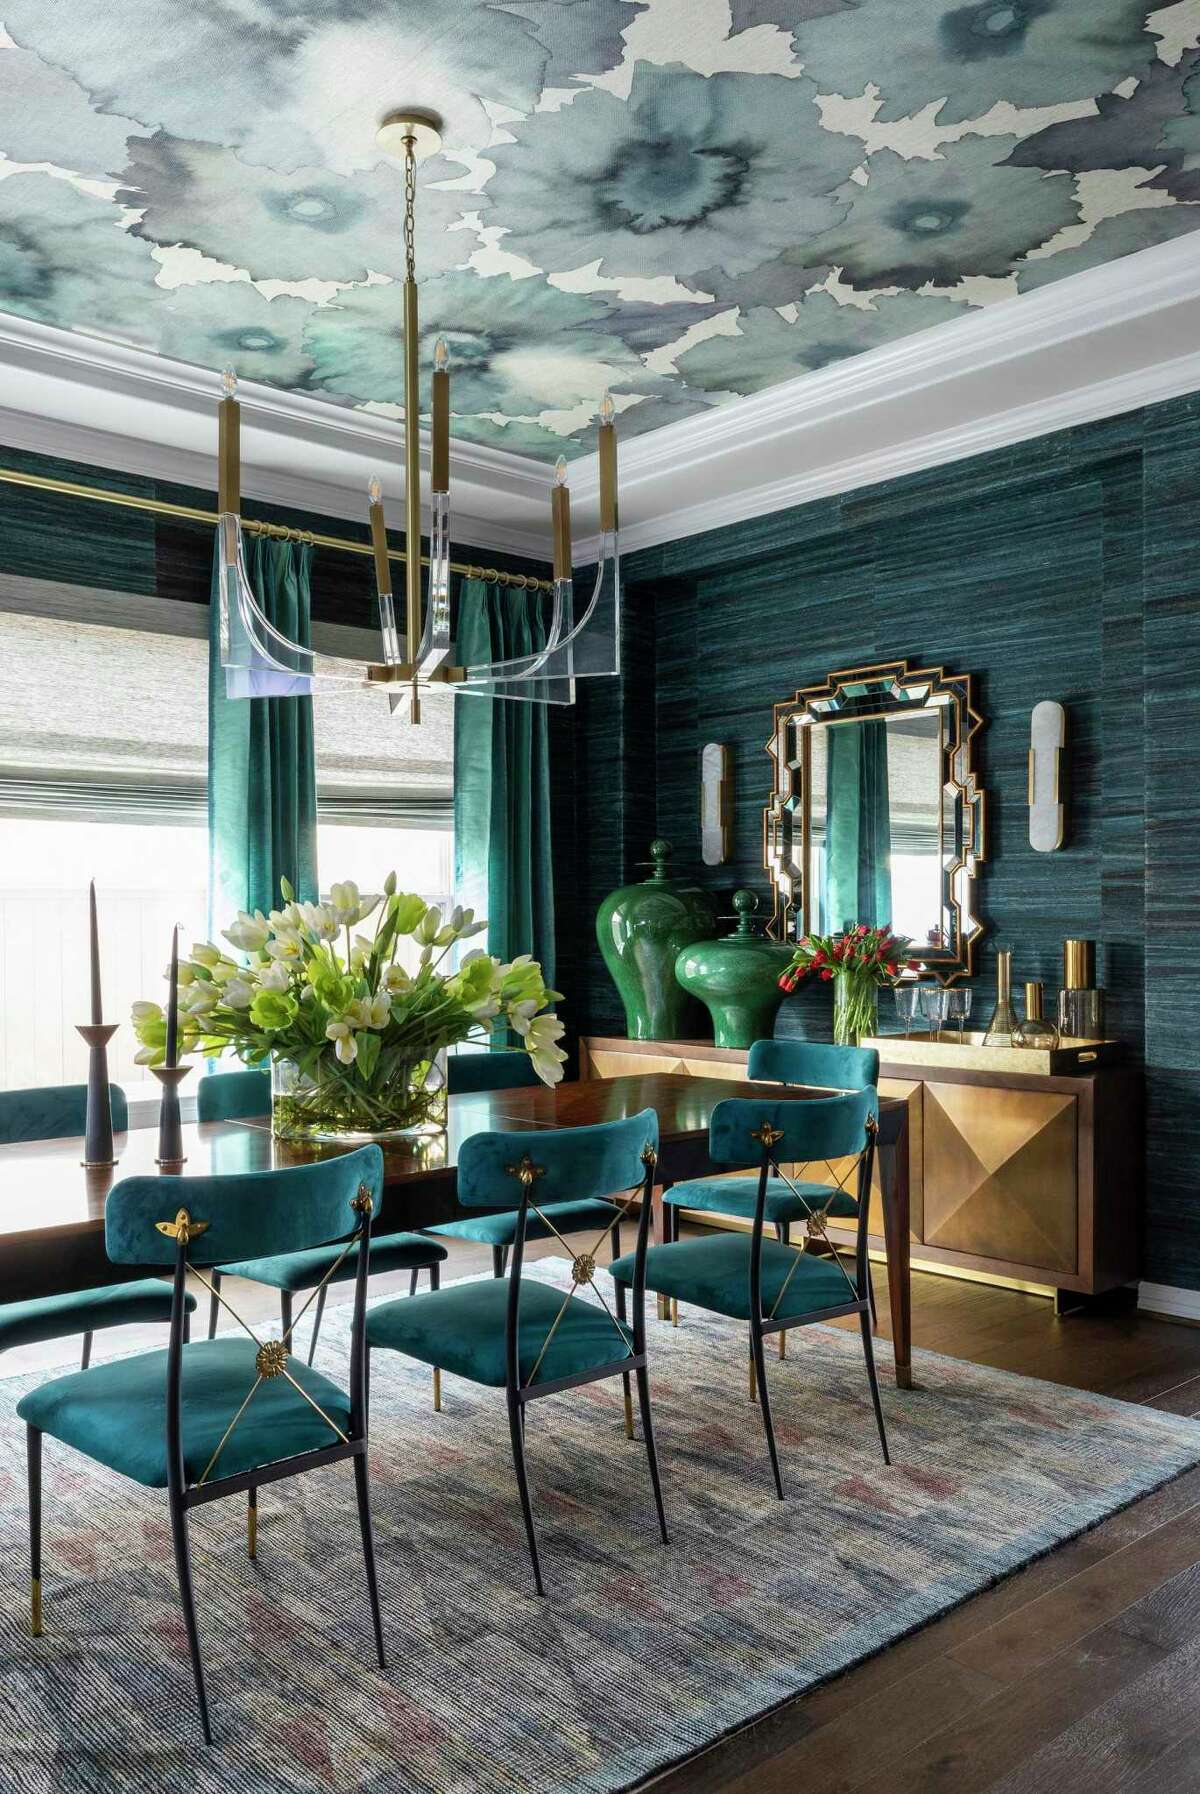 Teal wallcoverings and upholstery factor heavily into the formal living room and dining room.